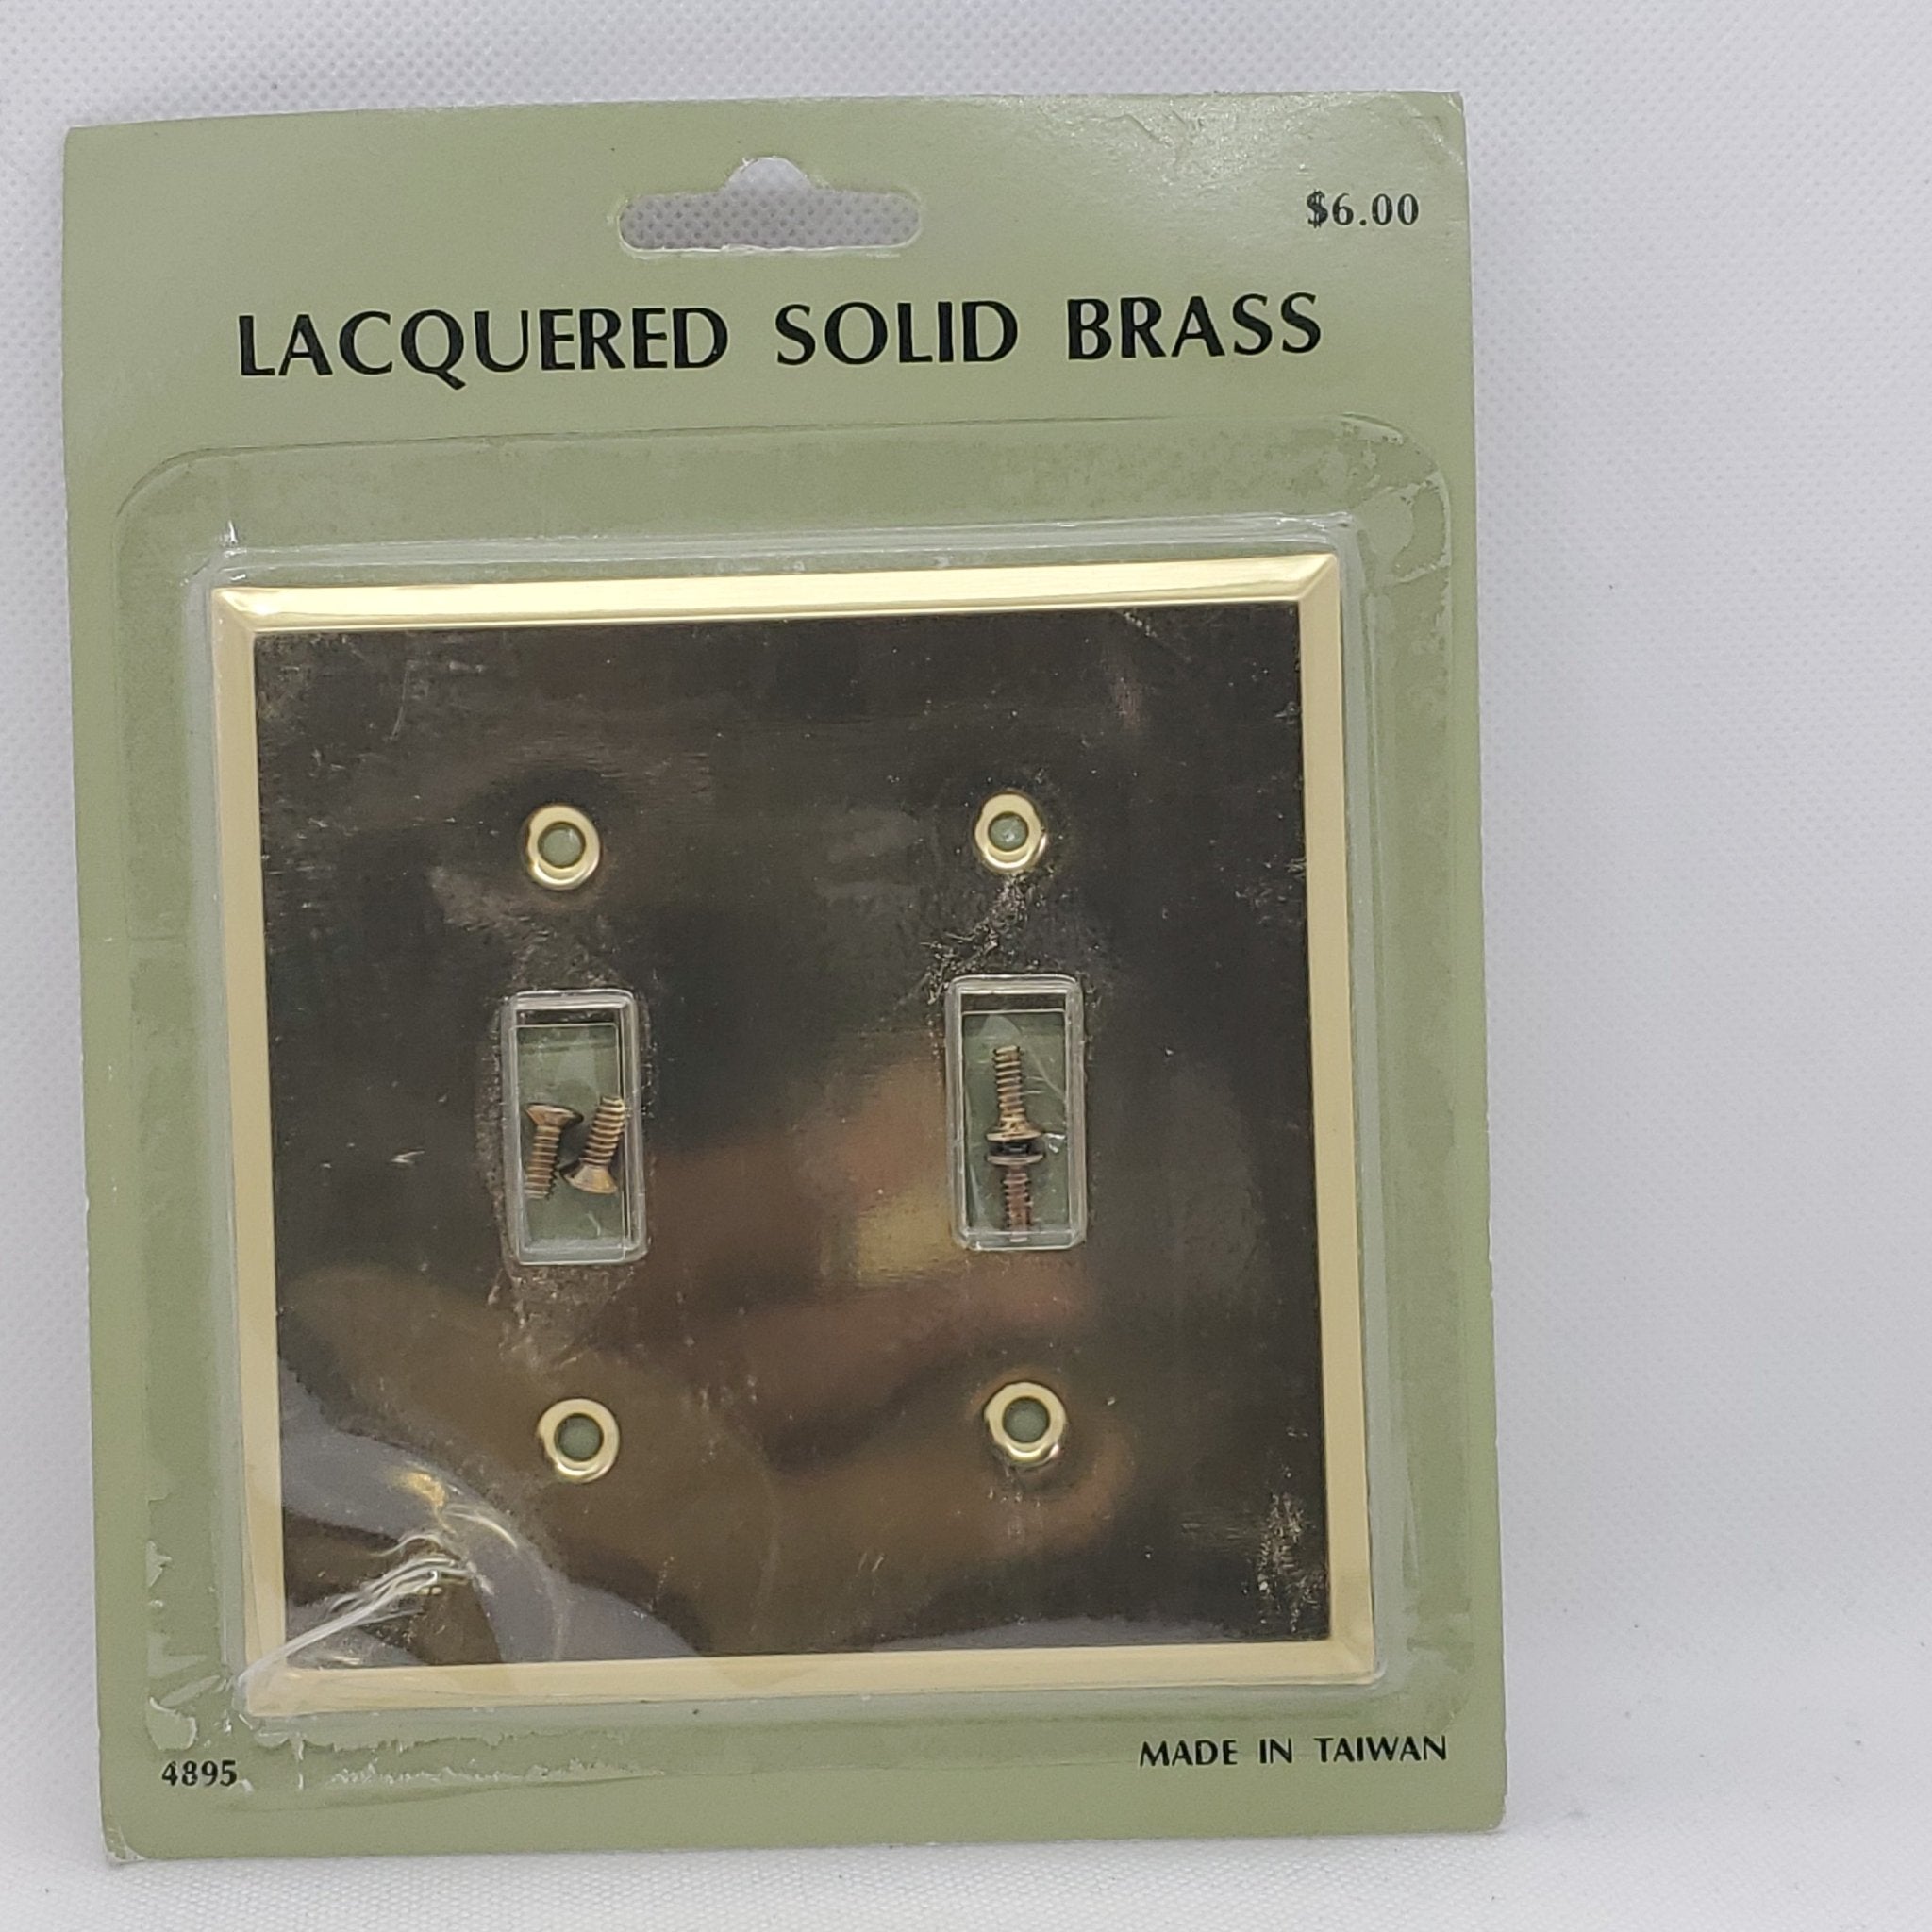 Lacquered Polish Brass Double Switch Plate - Bargainwizz